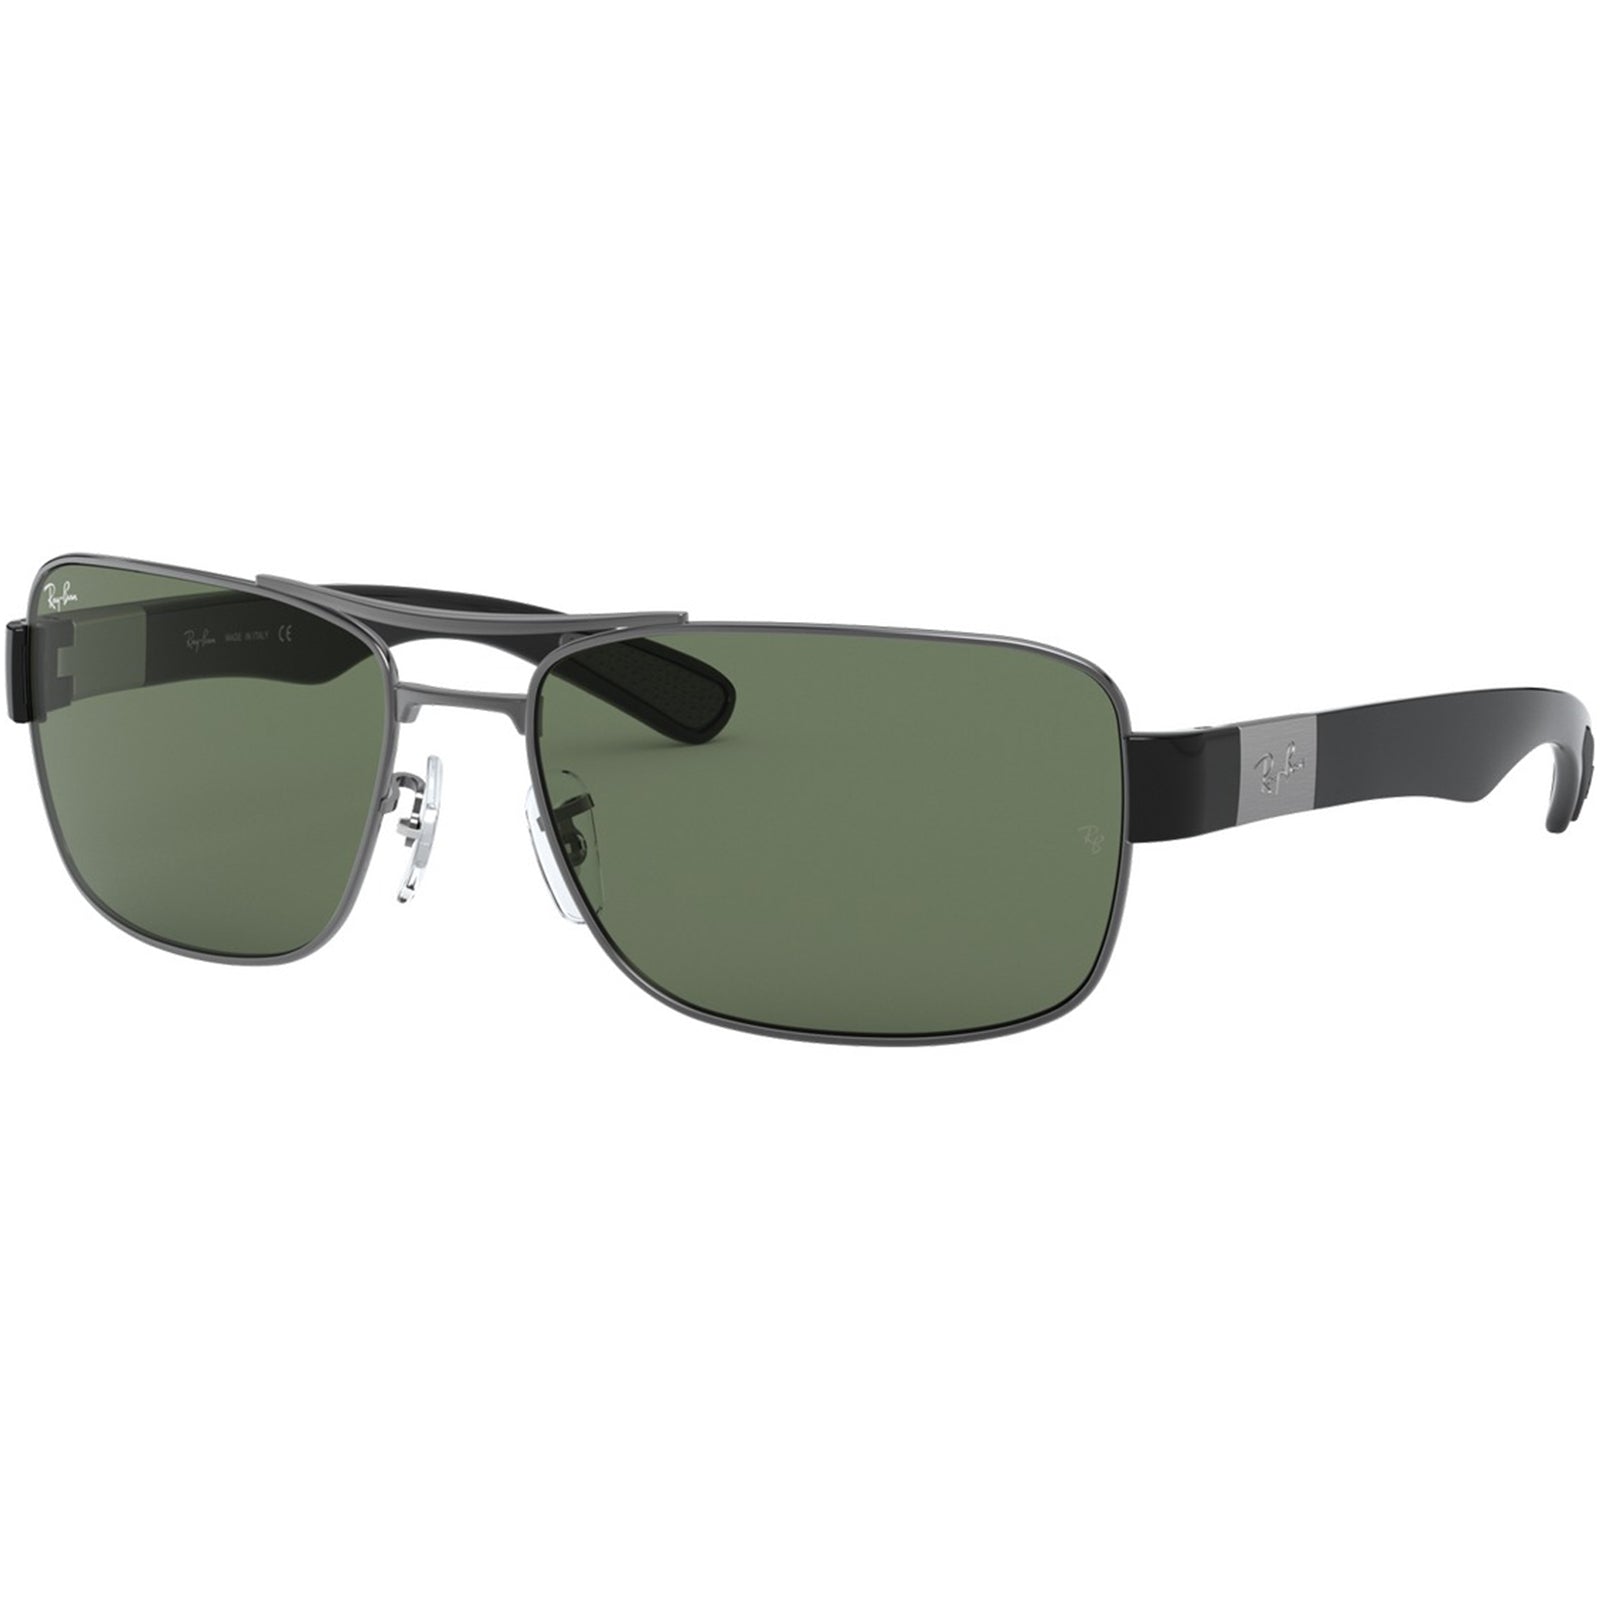 Ray-Ban RB3522 Men's Lifestyle Sunglasses-0RB3522